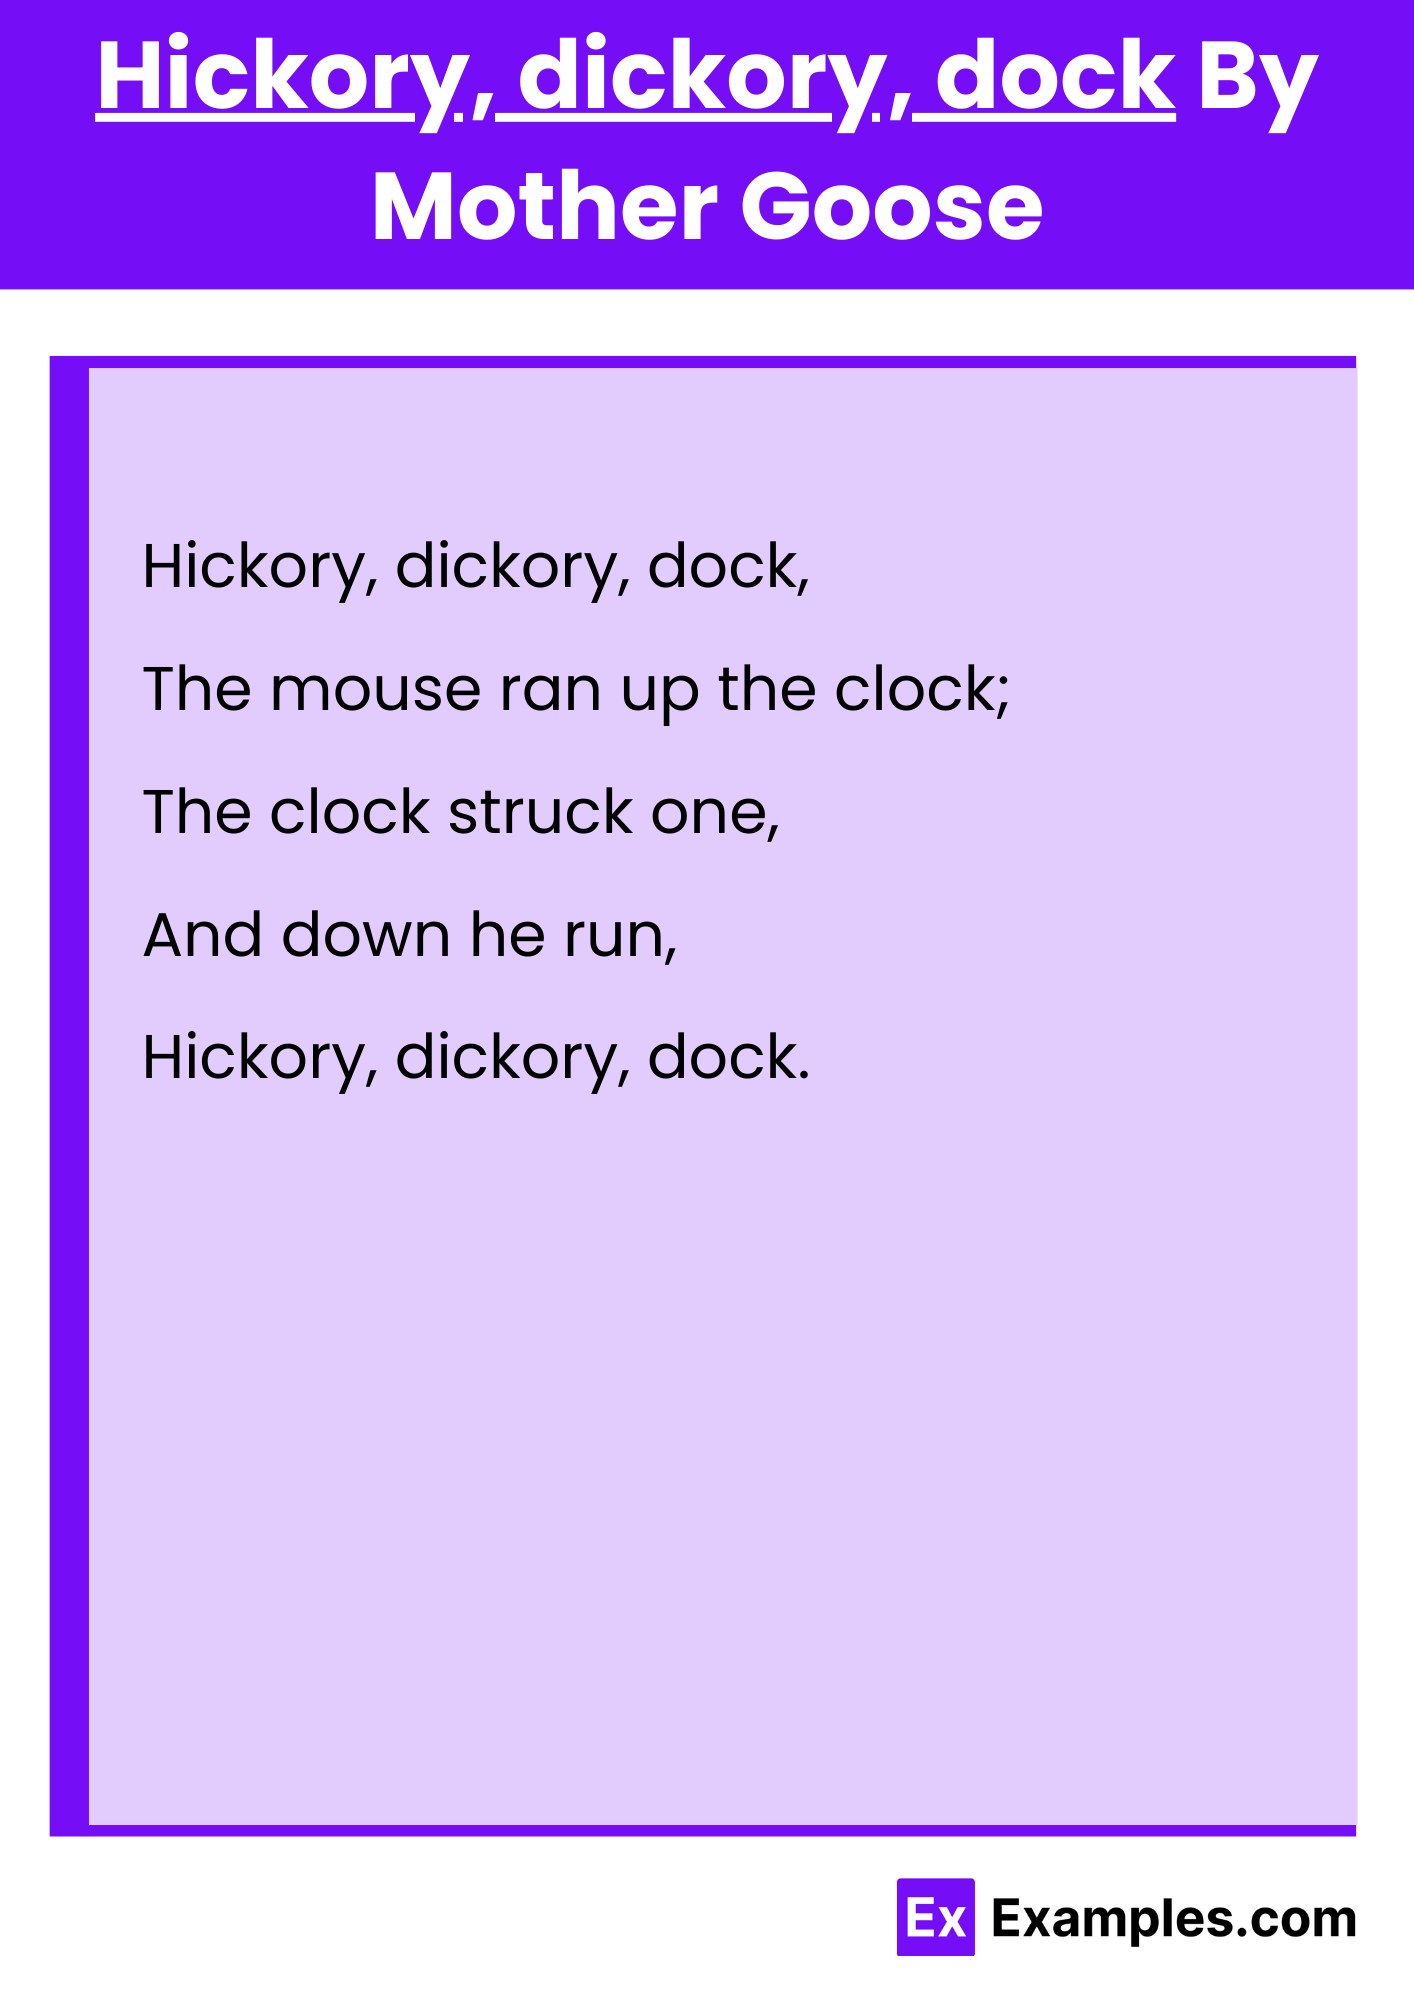 Hickory, dickory, dock By Mother Goose